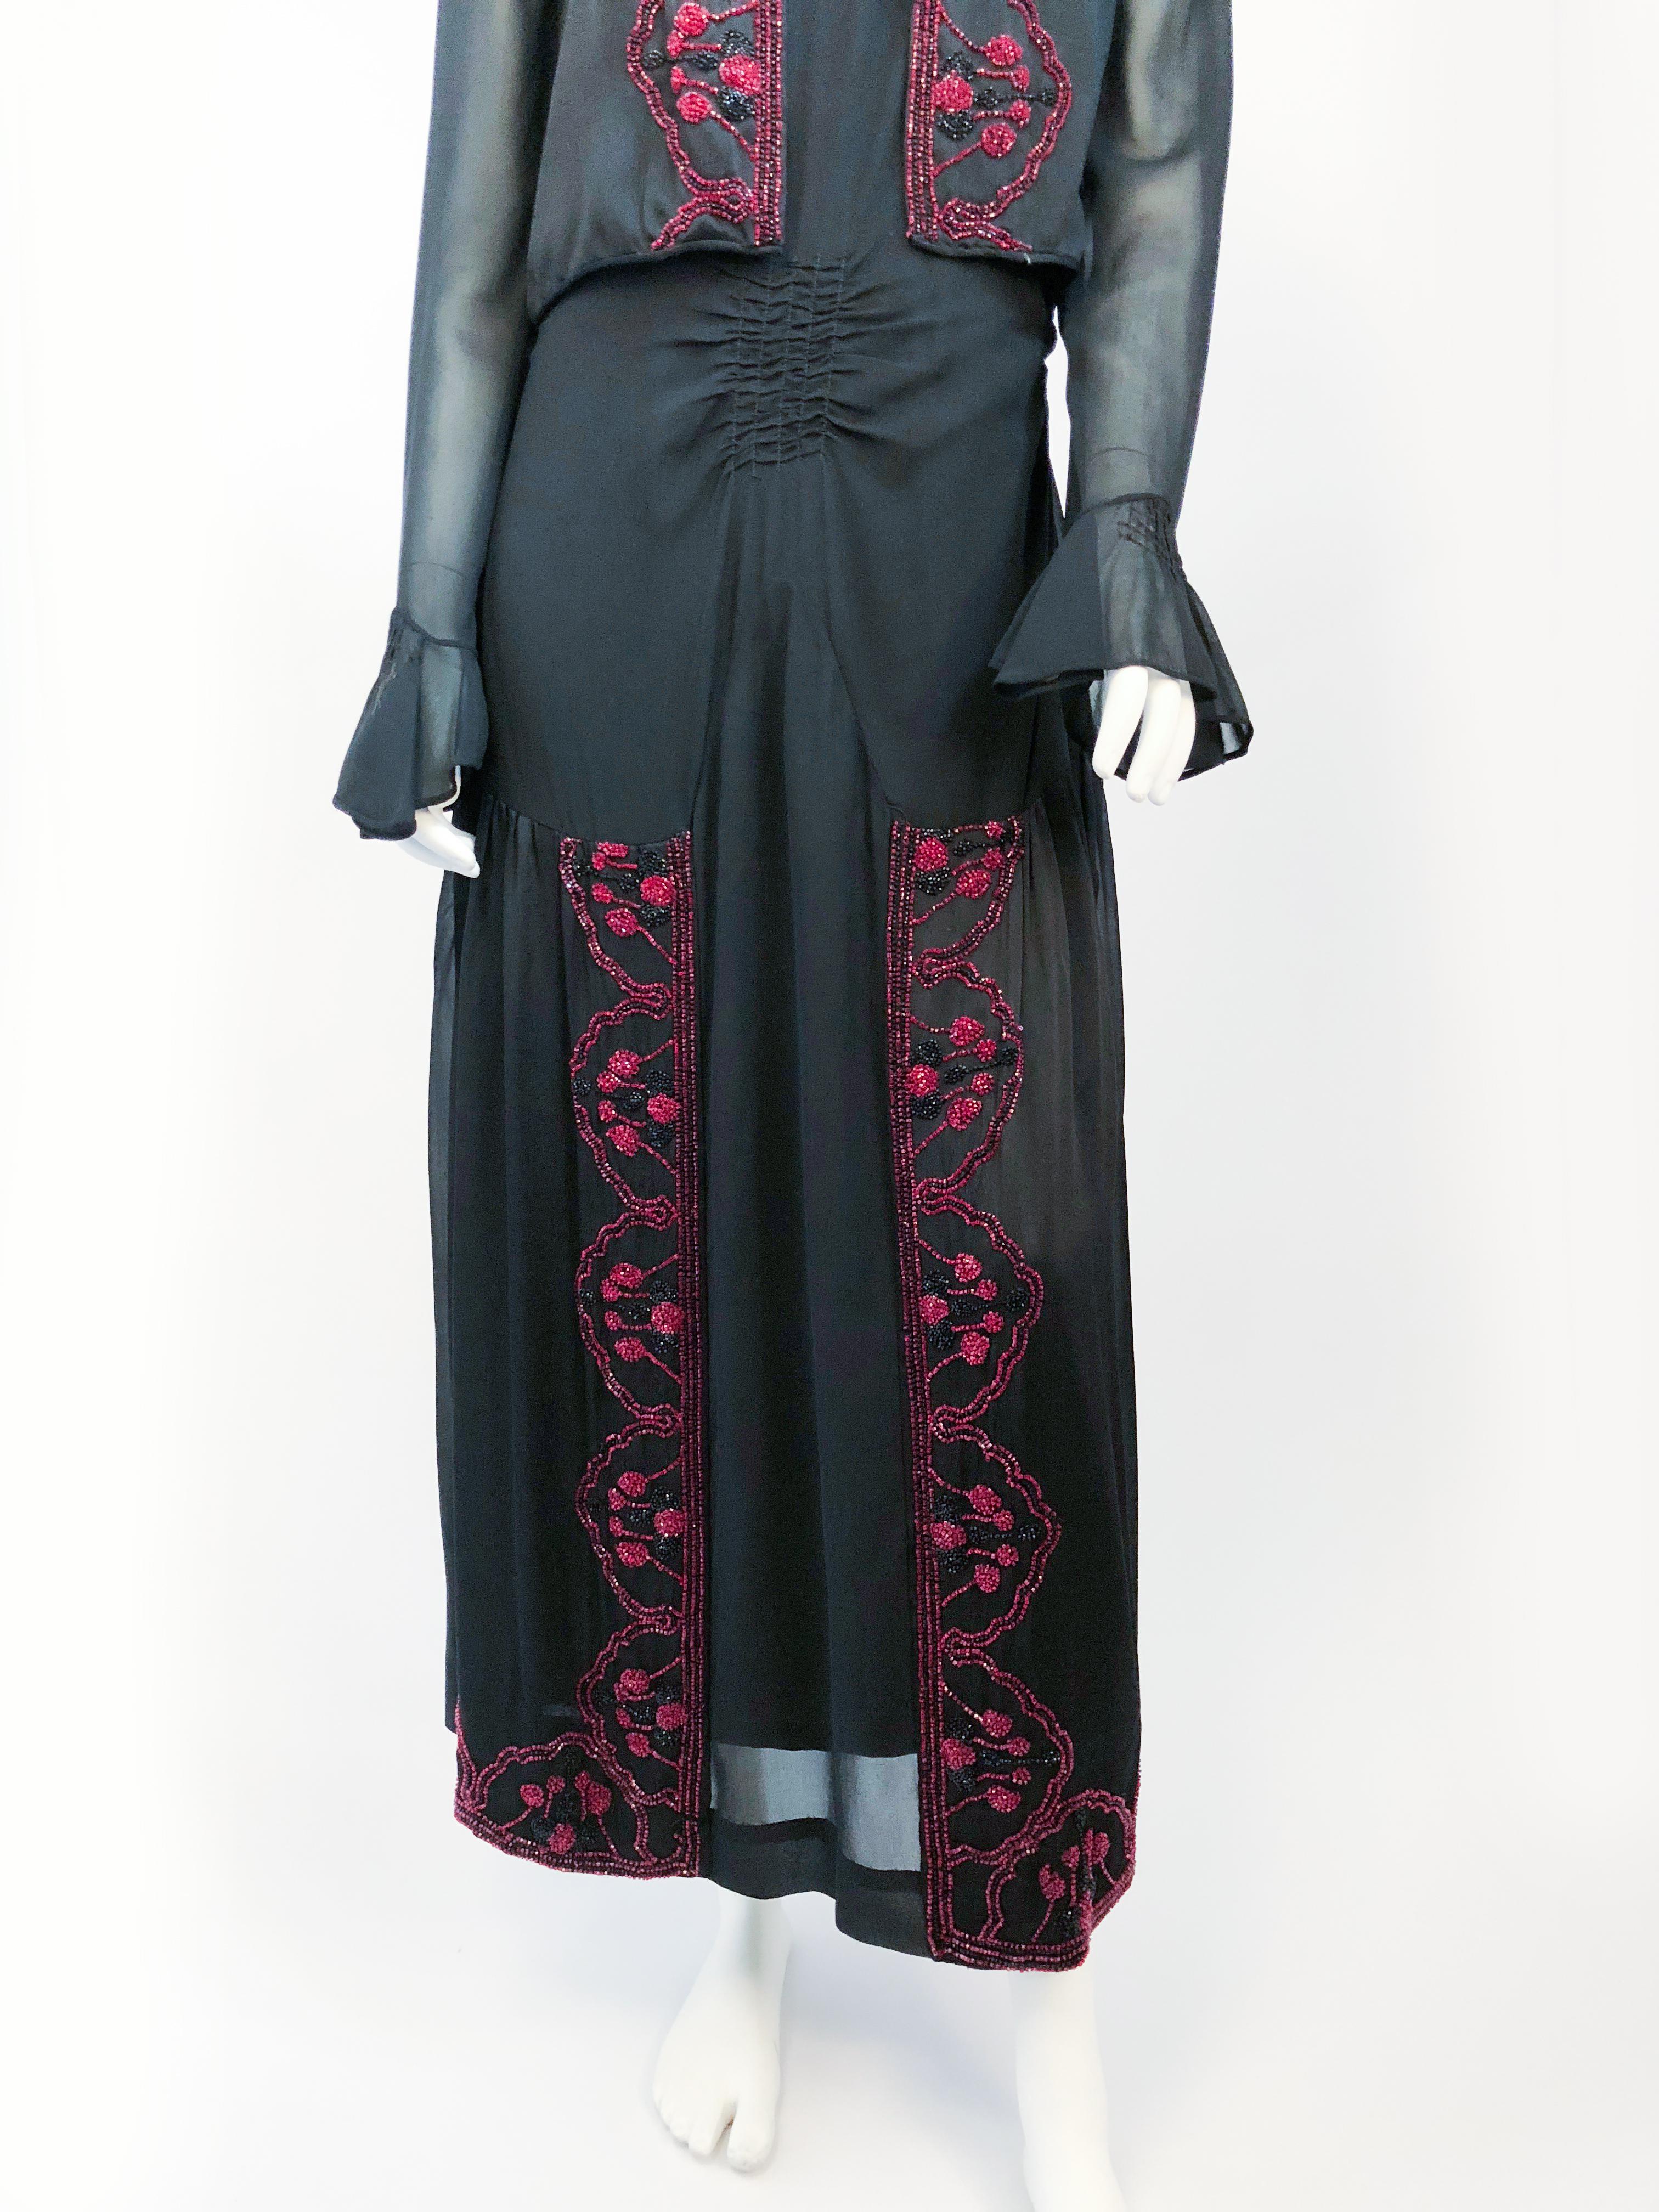 Women's 1920s Black Silk Chiffon Dress and Vest with Hand Beading Detail For Sale